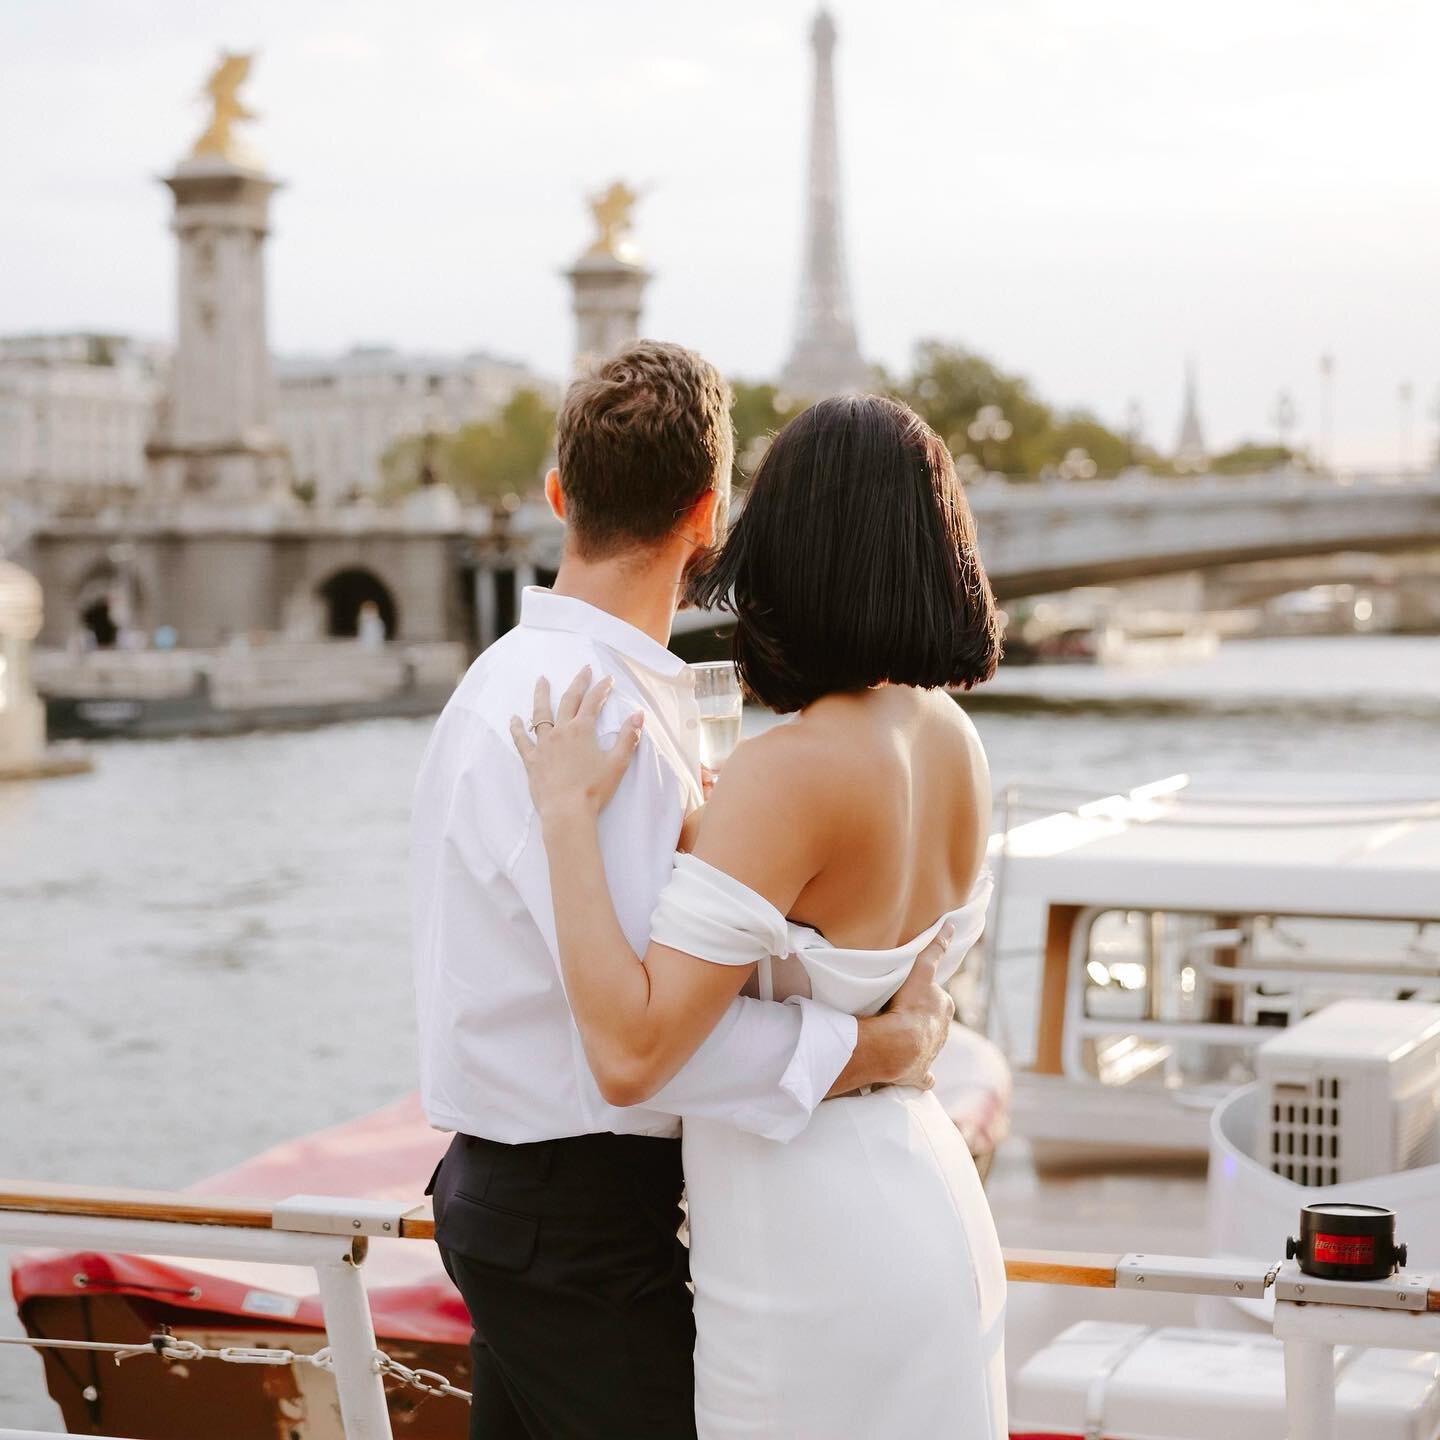 Let&rsquo;s raise a glass!! 🥂 Our very own, Nicole, married the love of her life Artem in Paris! We can&rsquo;t wait to see the 4 episode wedding journey in early 2023 on @eentertainment Plus we hear there&rsquo;s a Bonita Bonita cameo in there. 😘 